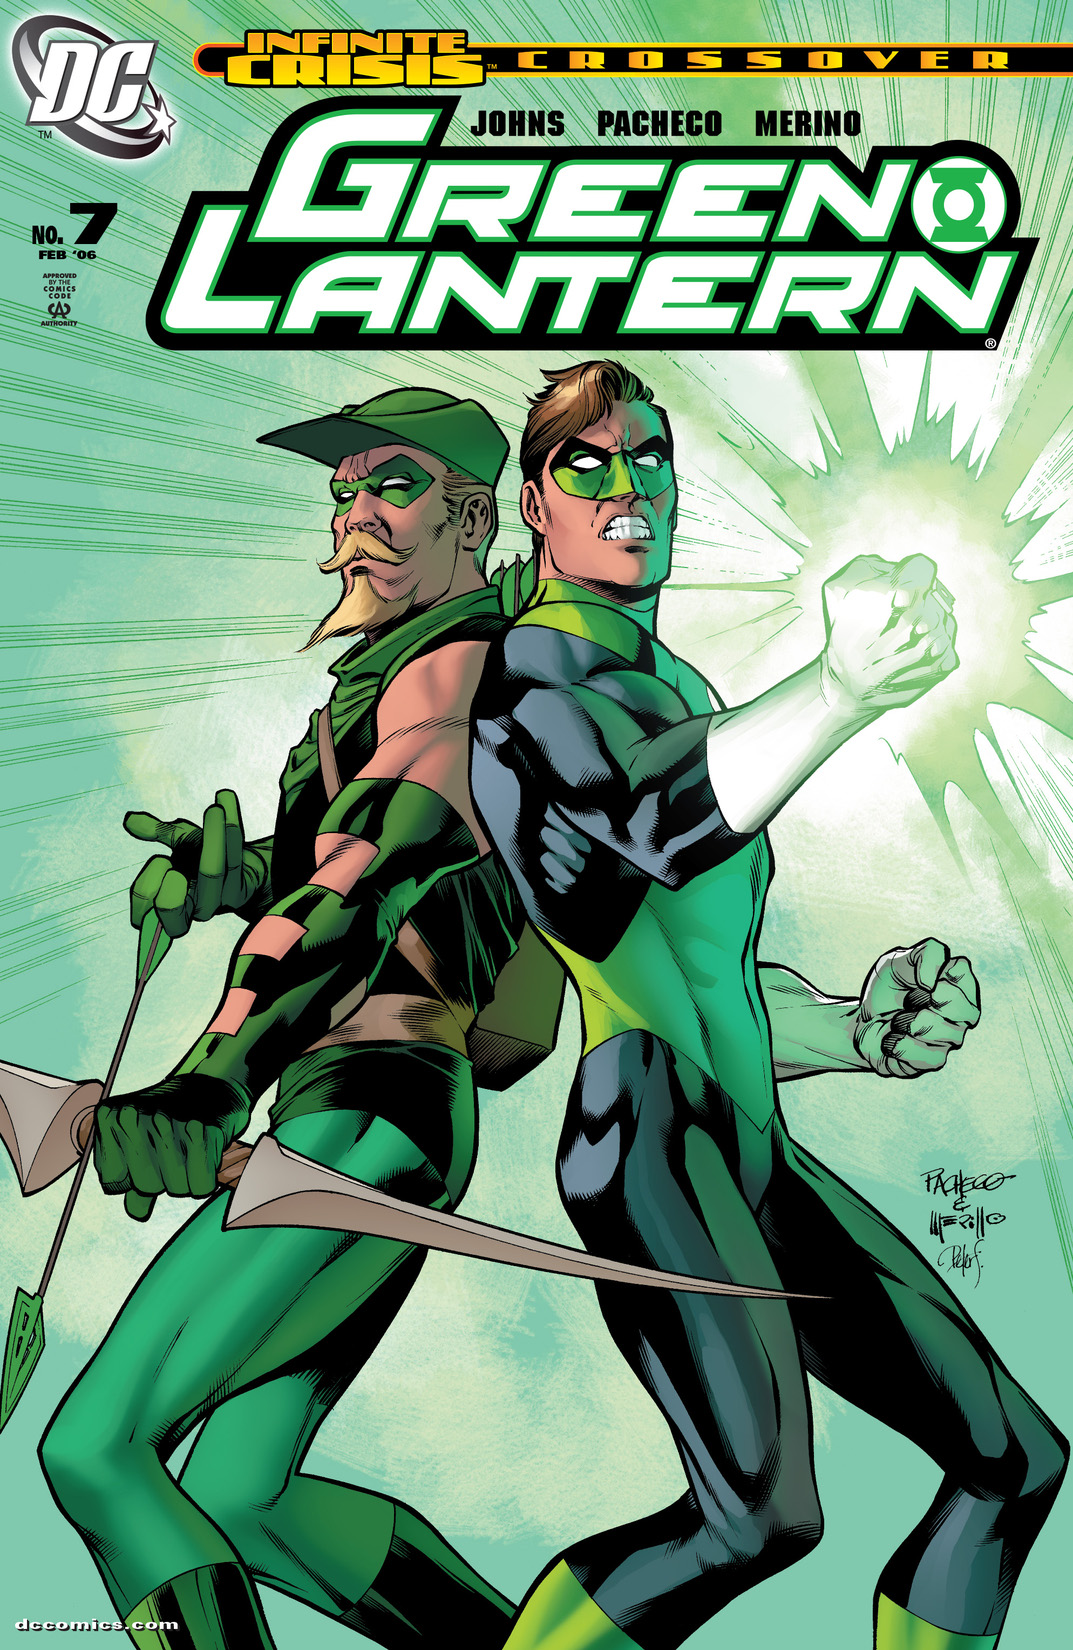 Green Lantern (2005-2011) #7 preview images